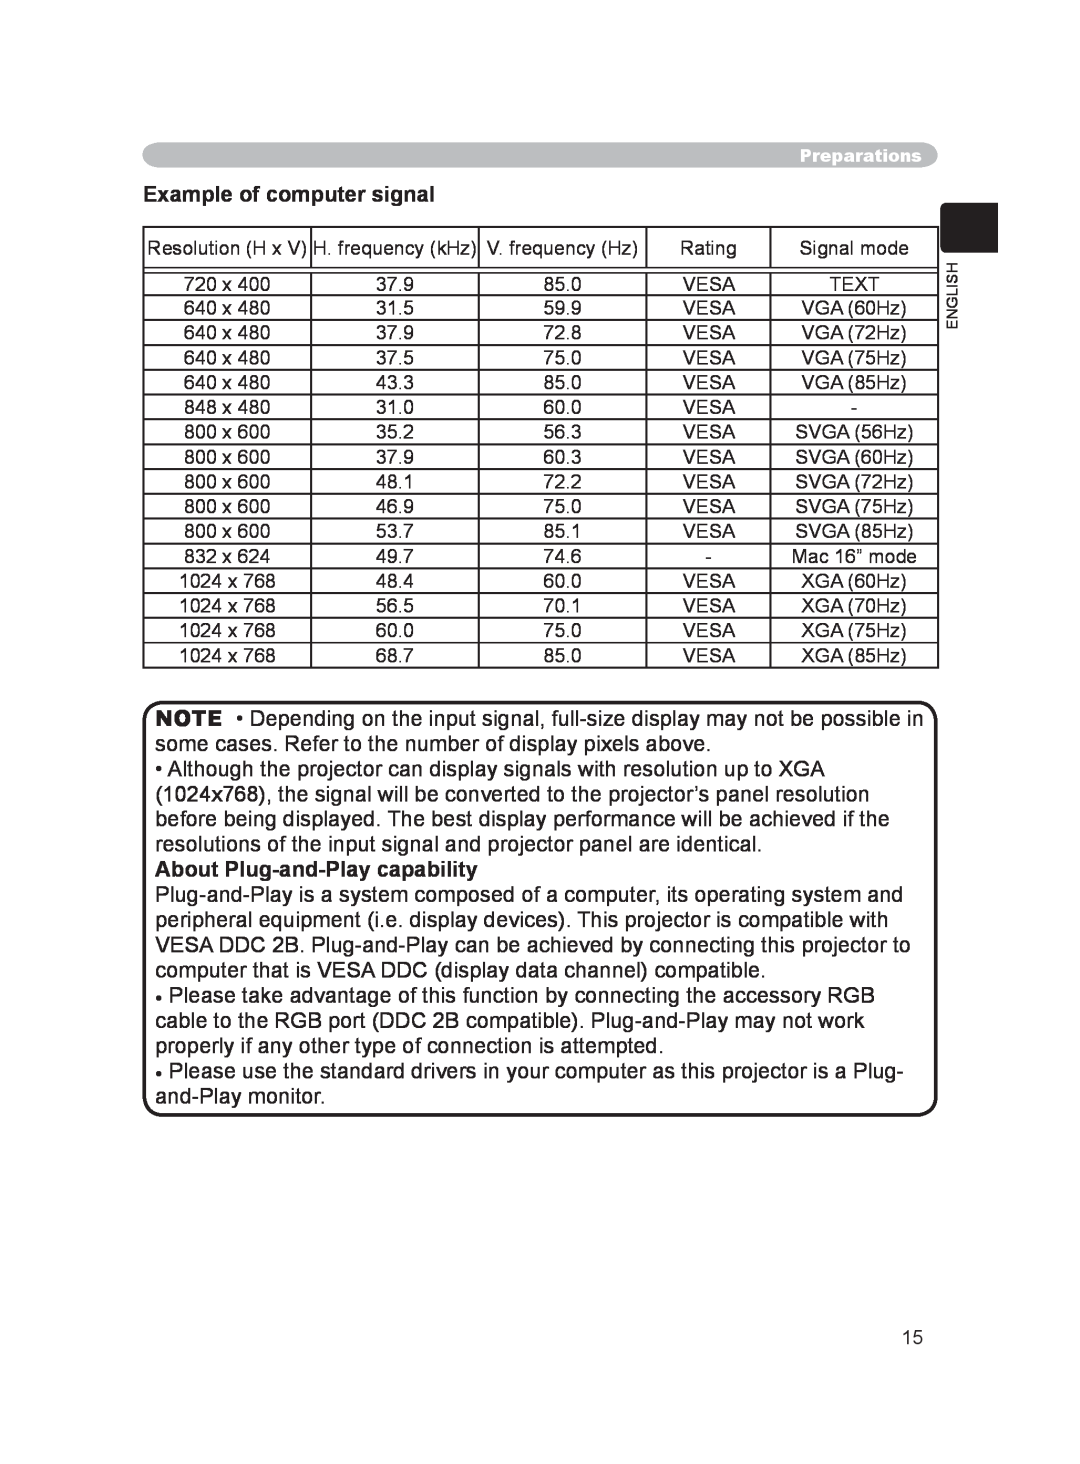 Hitachi PJ-LC9 user manual Example of computer signal, About Plug-and-Playcapability 